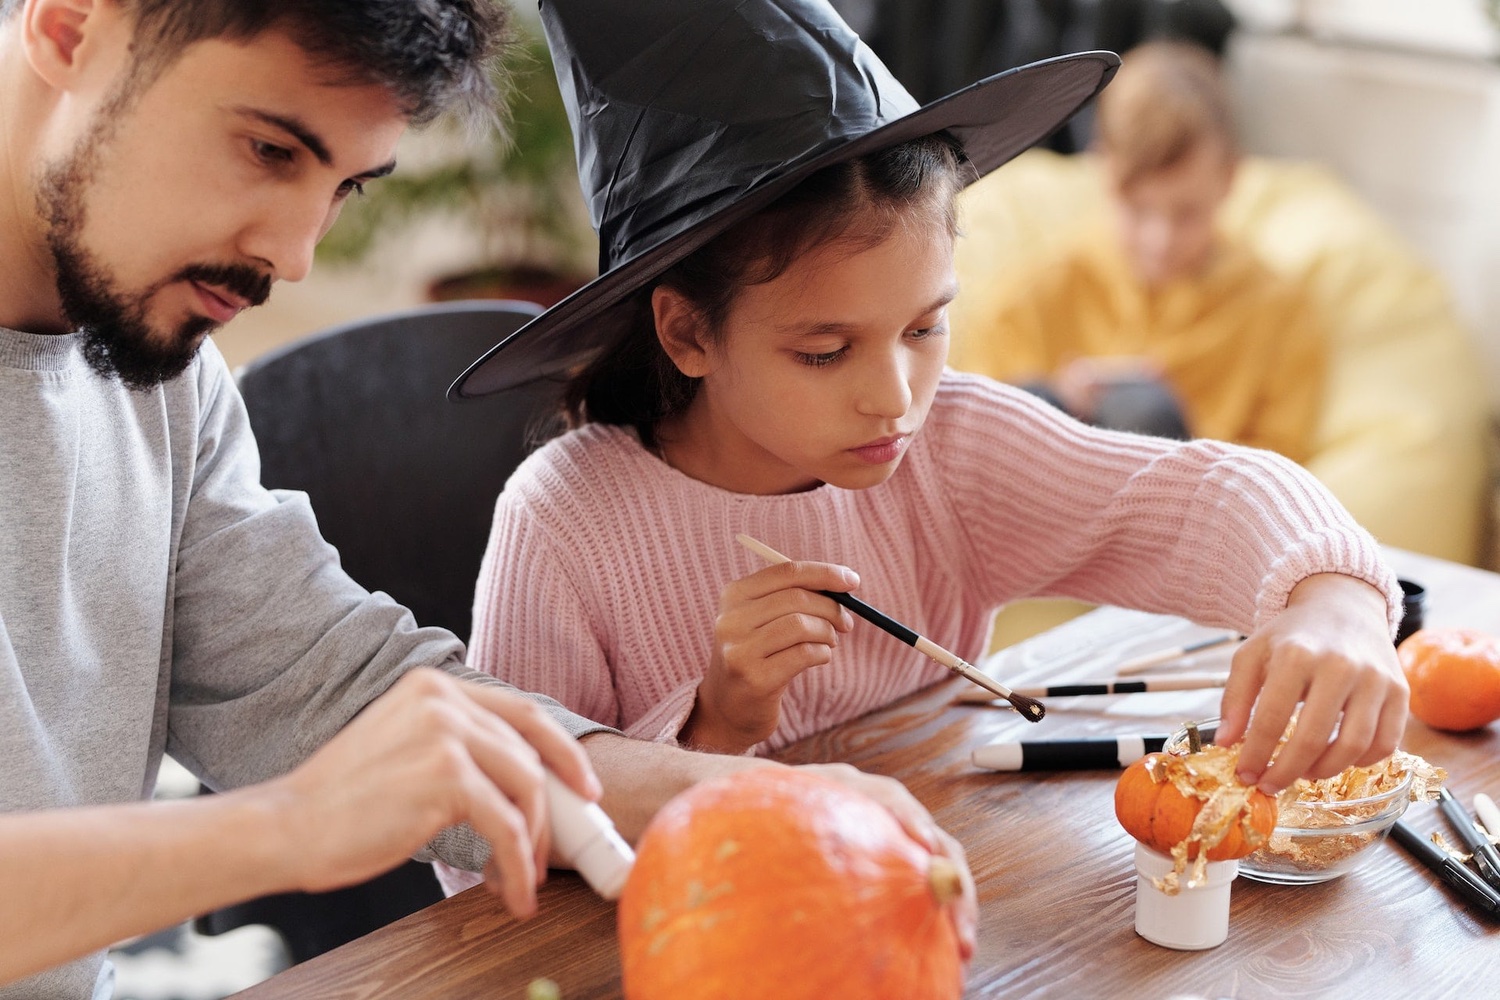 4 tips to enjoy Halloween to the fullest if you have diabetes